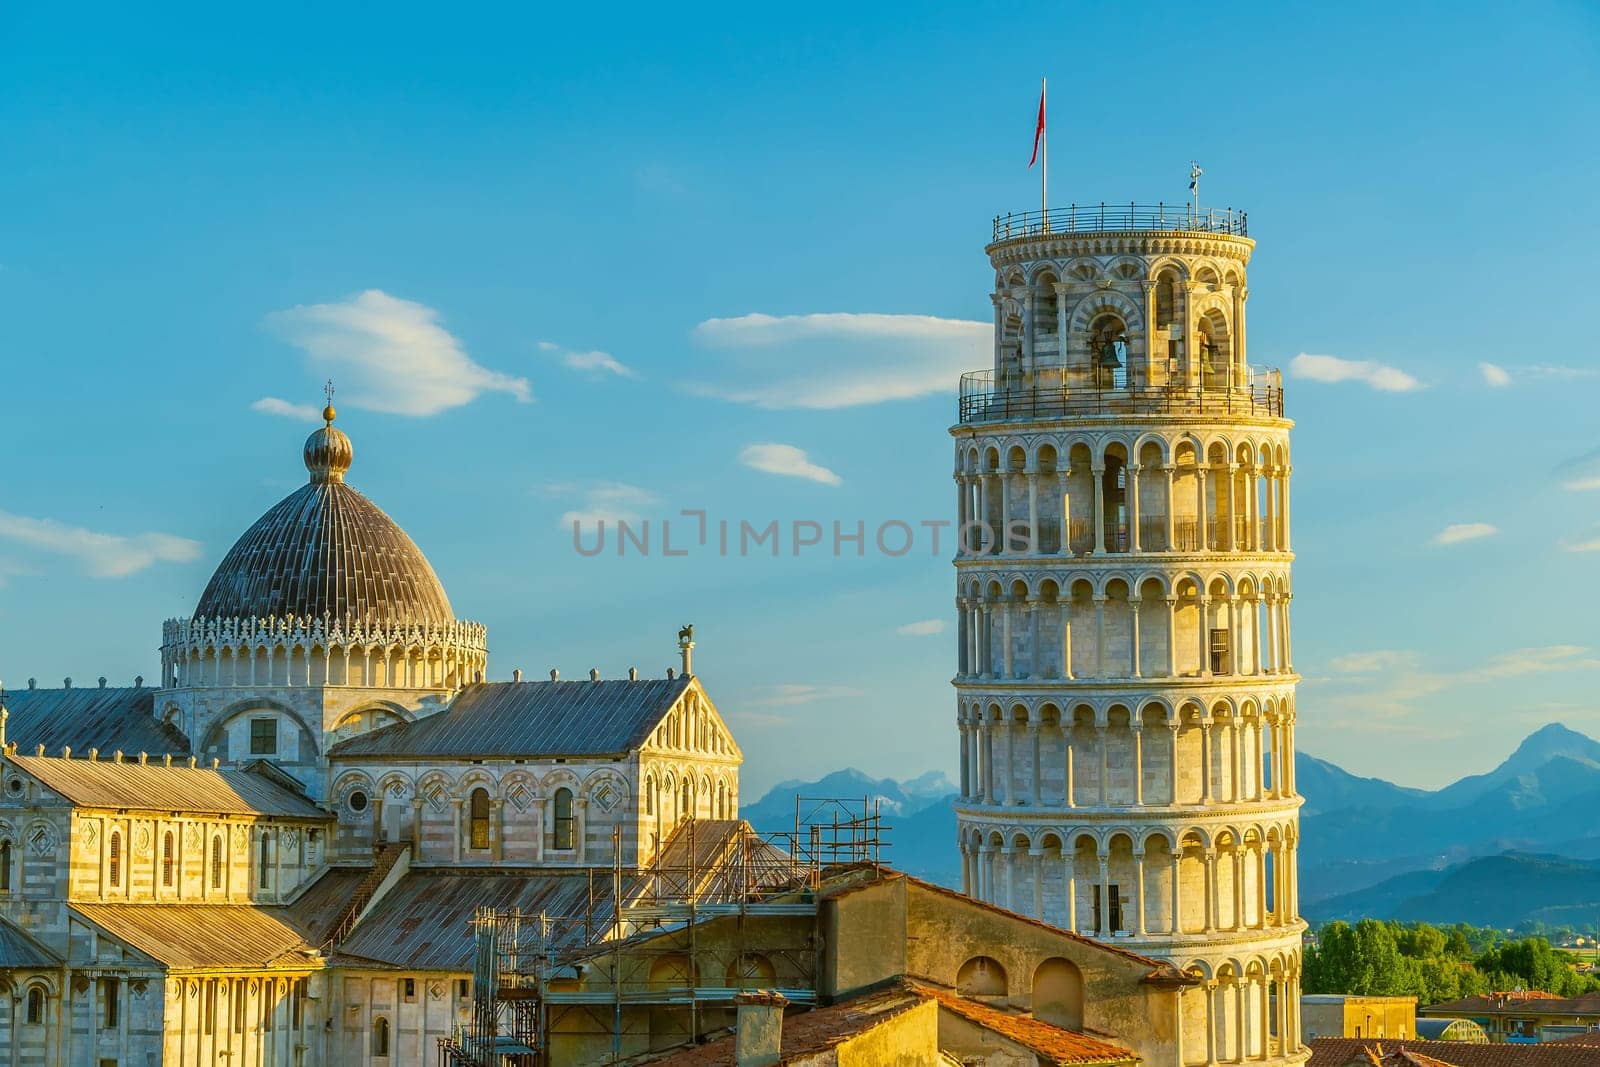 The famous Leaning Tower in Pisa, Italy with beautiful sunrise